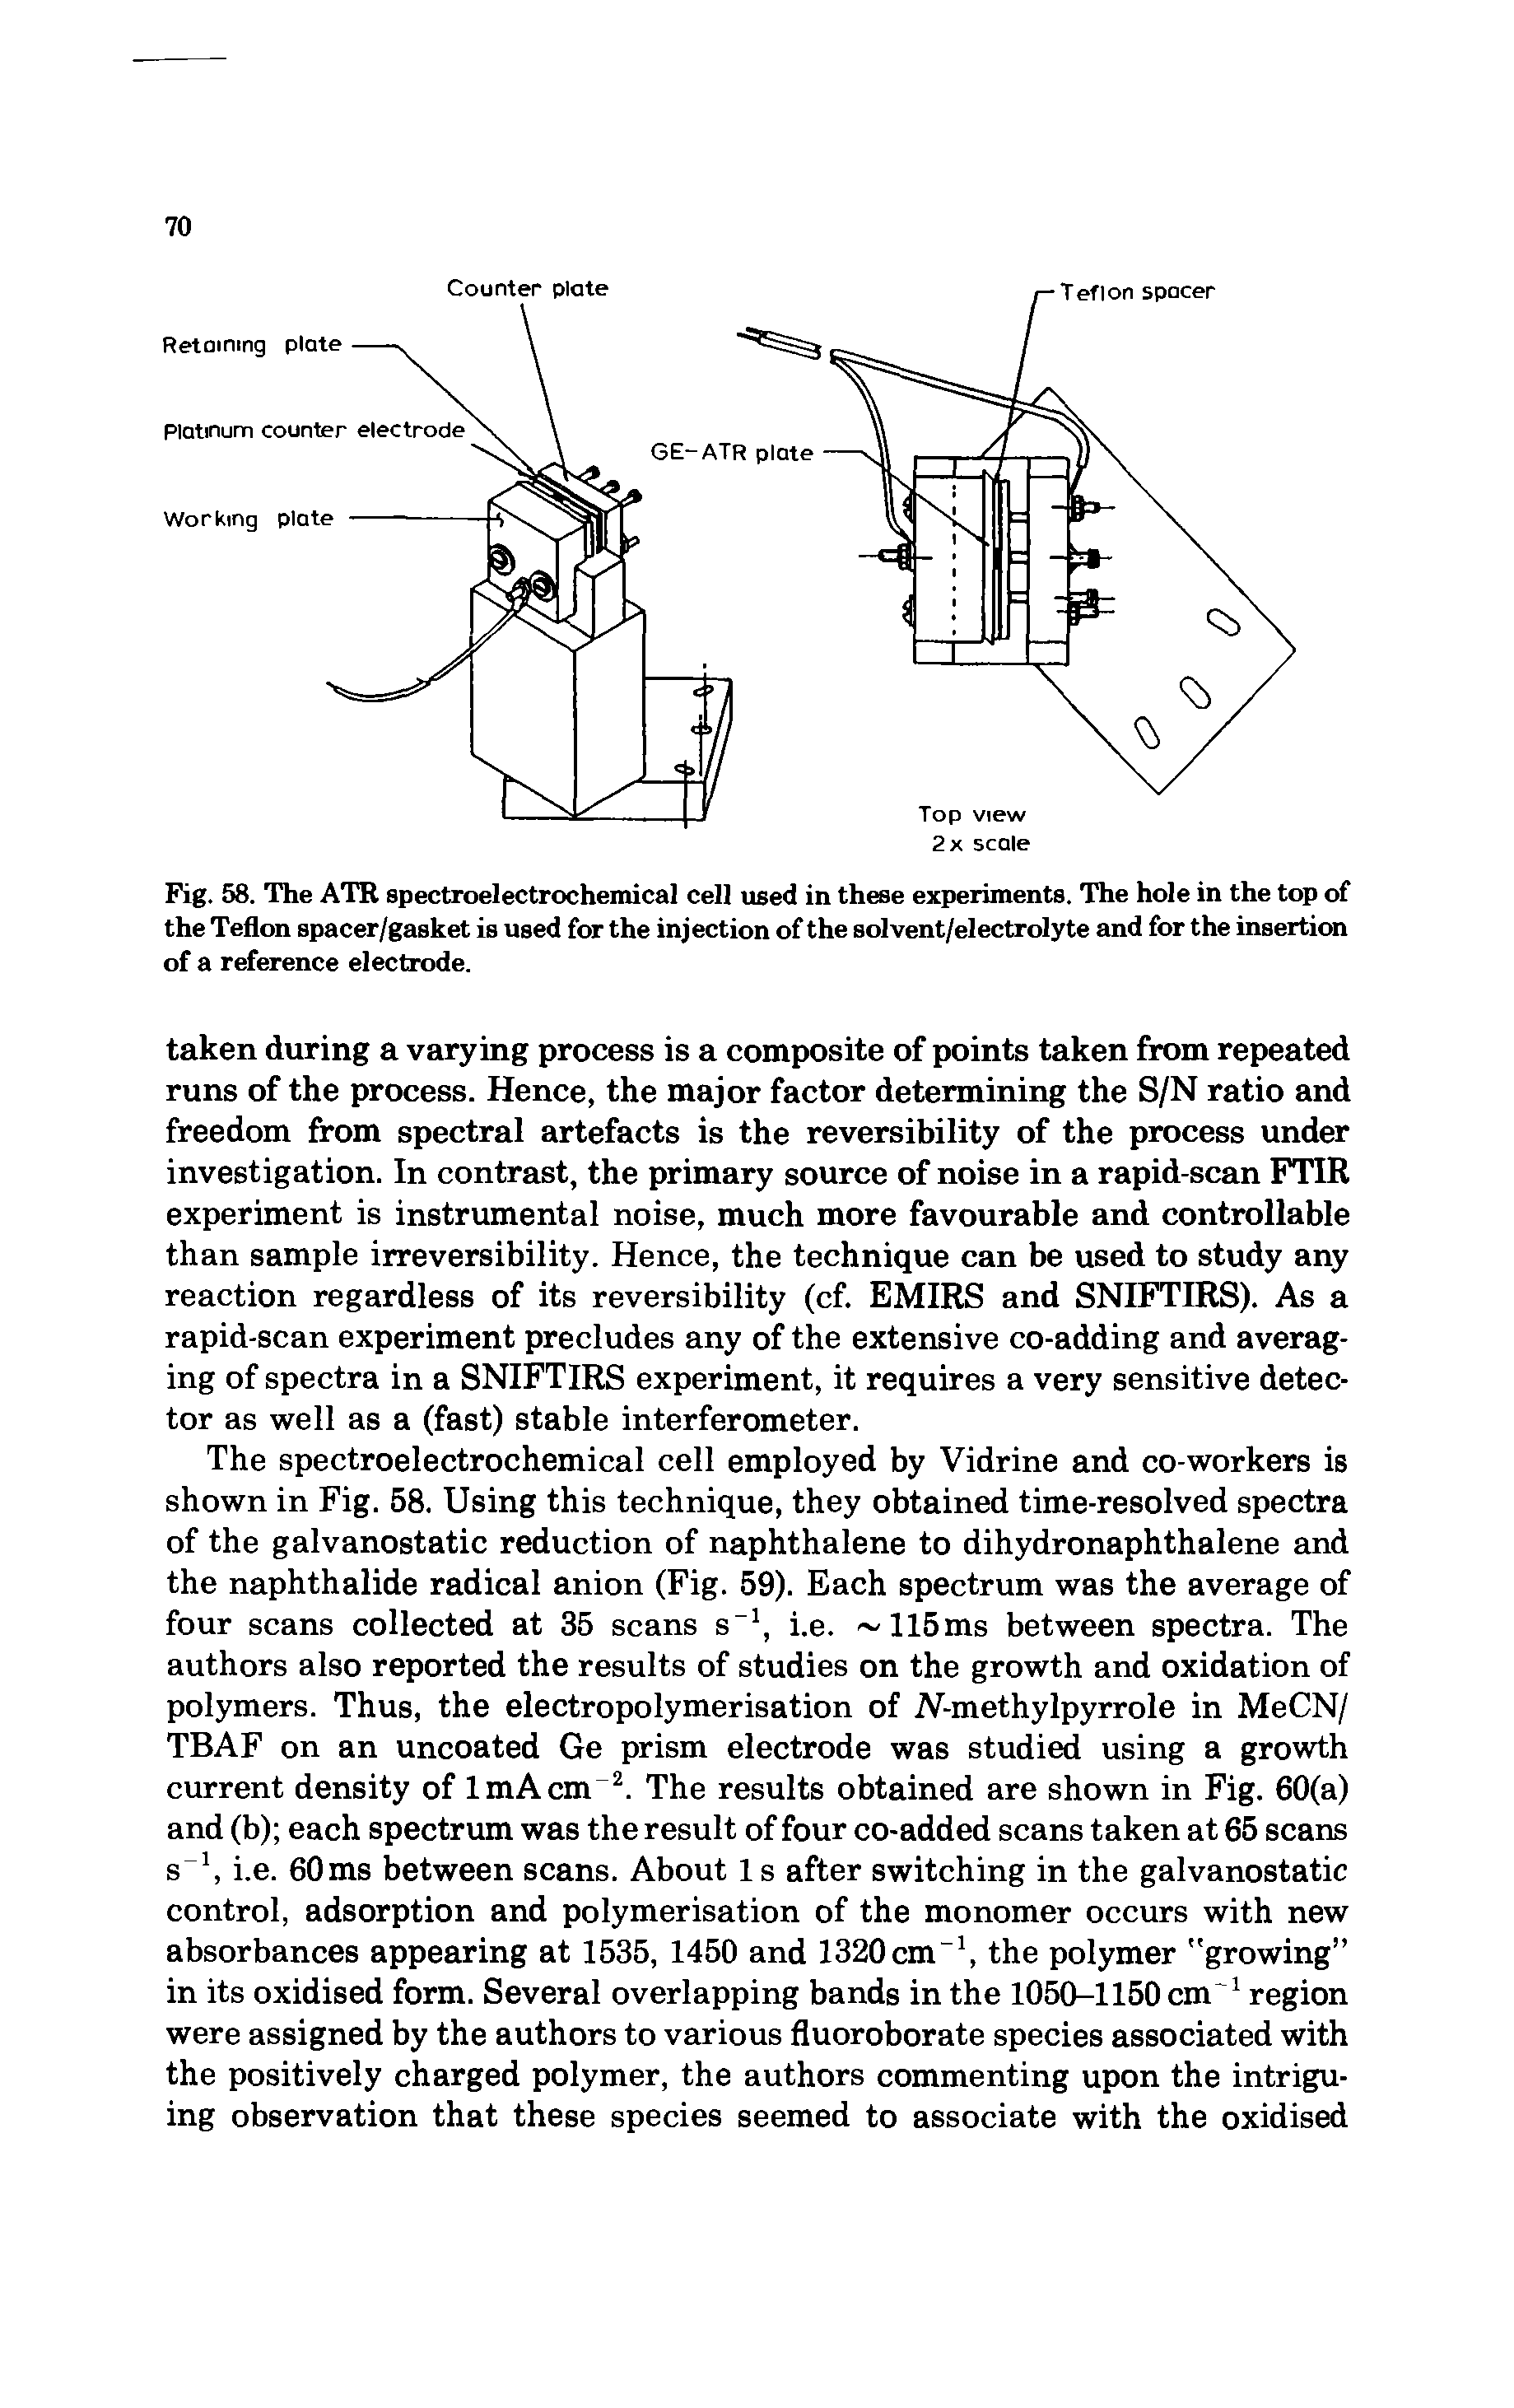 Fig. 58. The ATR spectroelectrochemical cell used in these experiments. The hole in the top of the Teflon spacer/gasket is used for the injection of the solvent/electrolyte and for the insertion of a reference electrode.